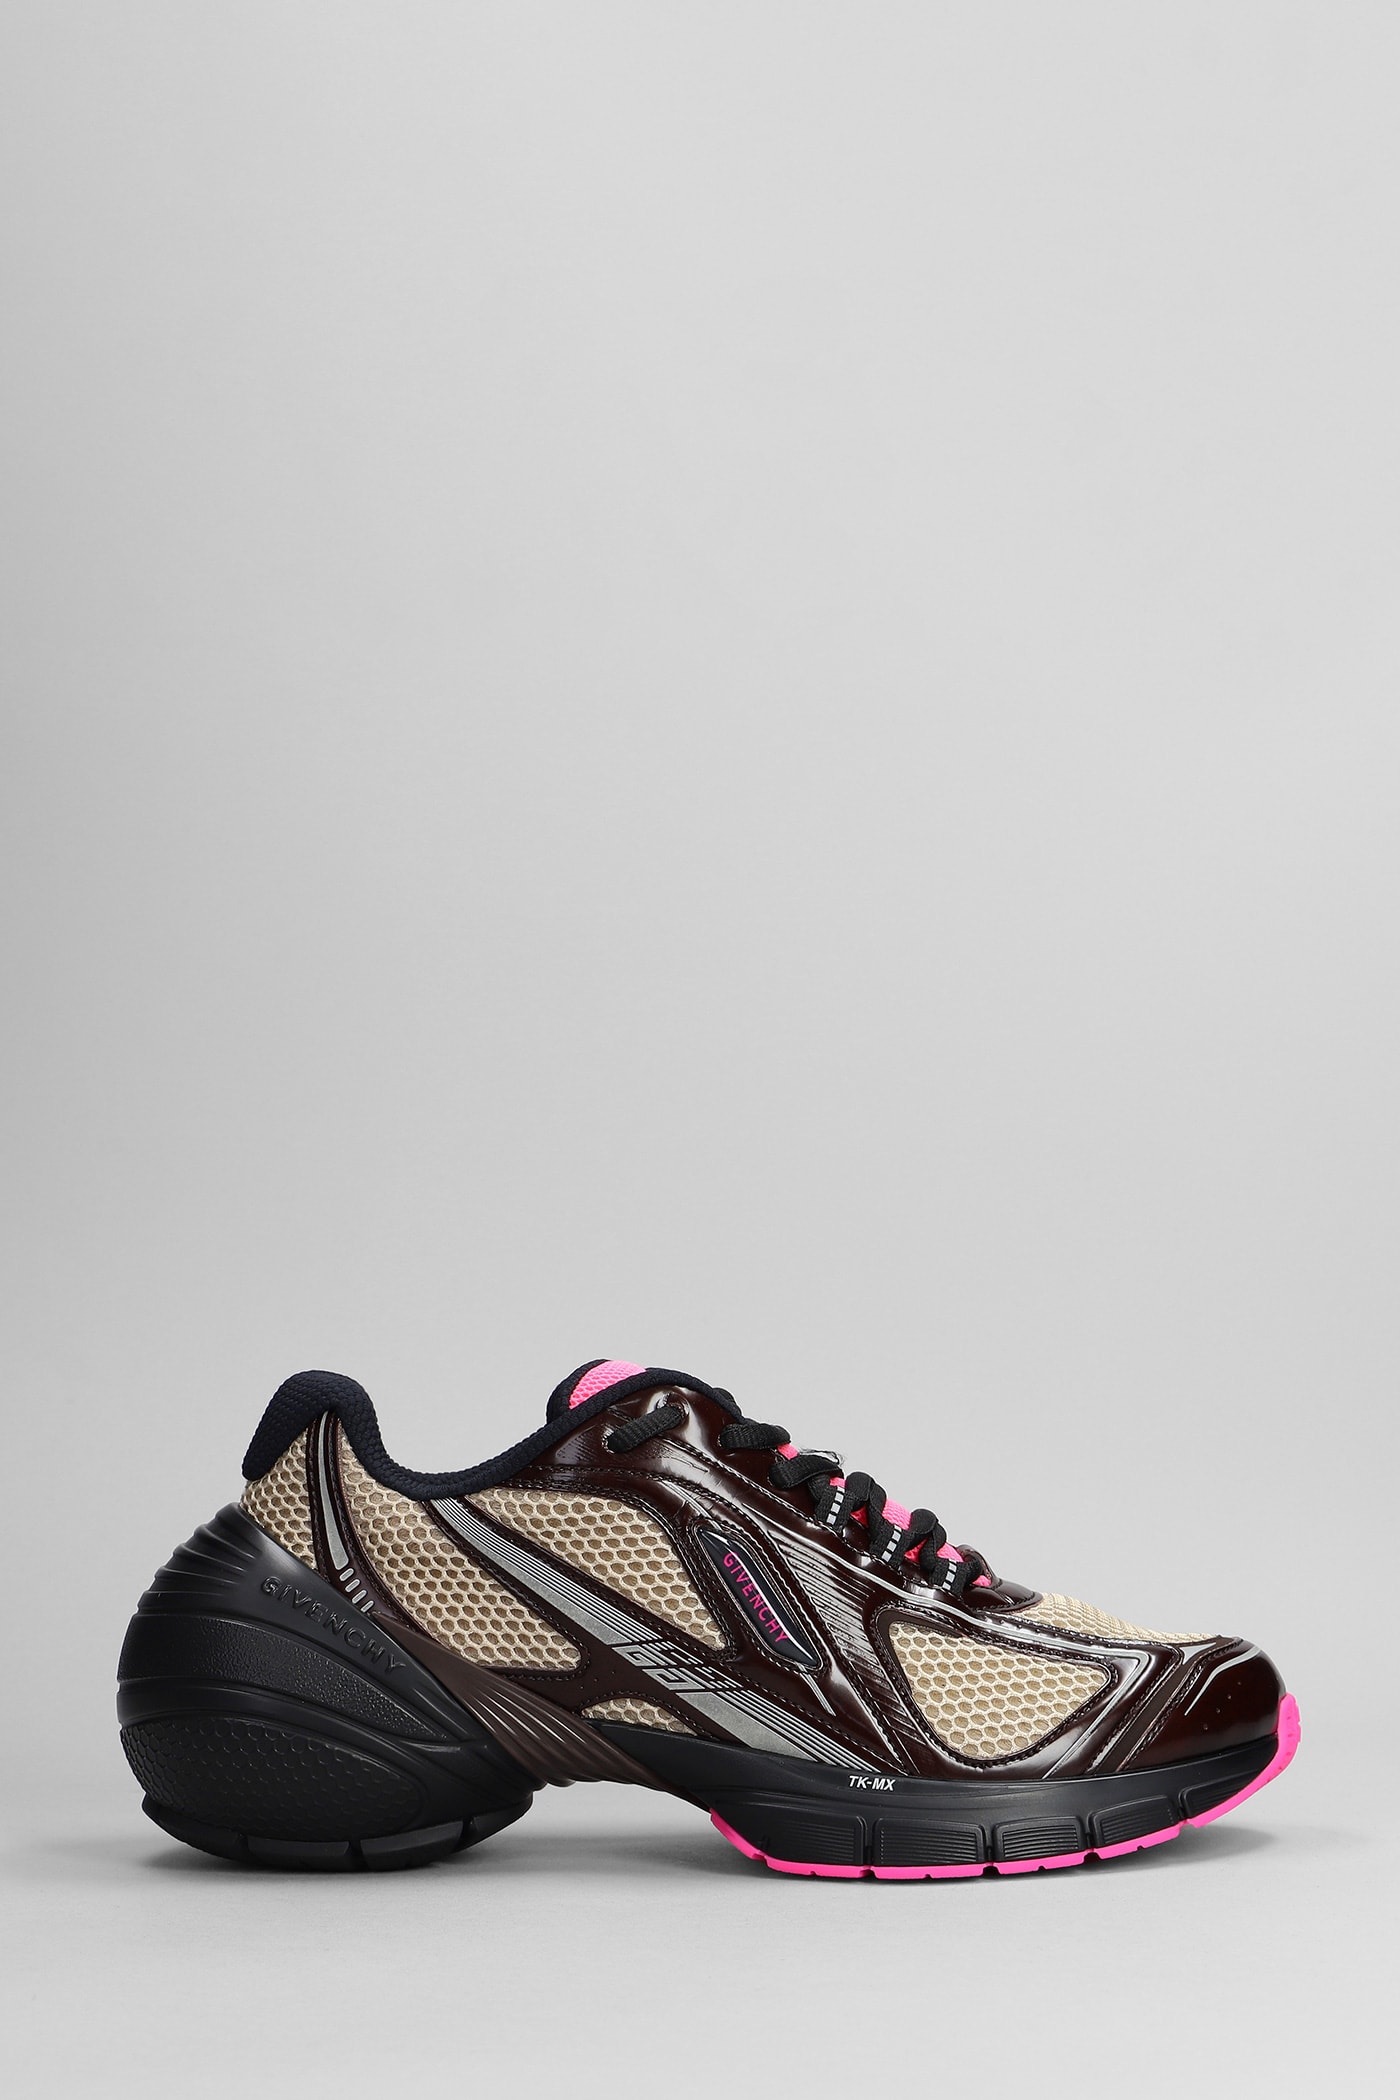 GIVENCHY TK-MX RUNNER trainers IN BORDEAUX POLYPROPYLENE